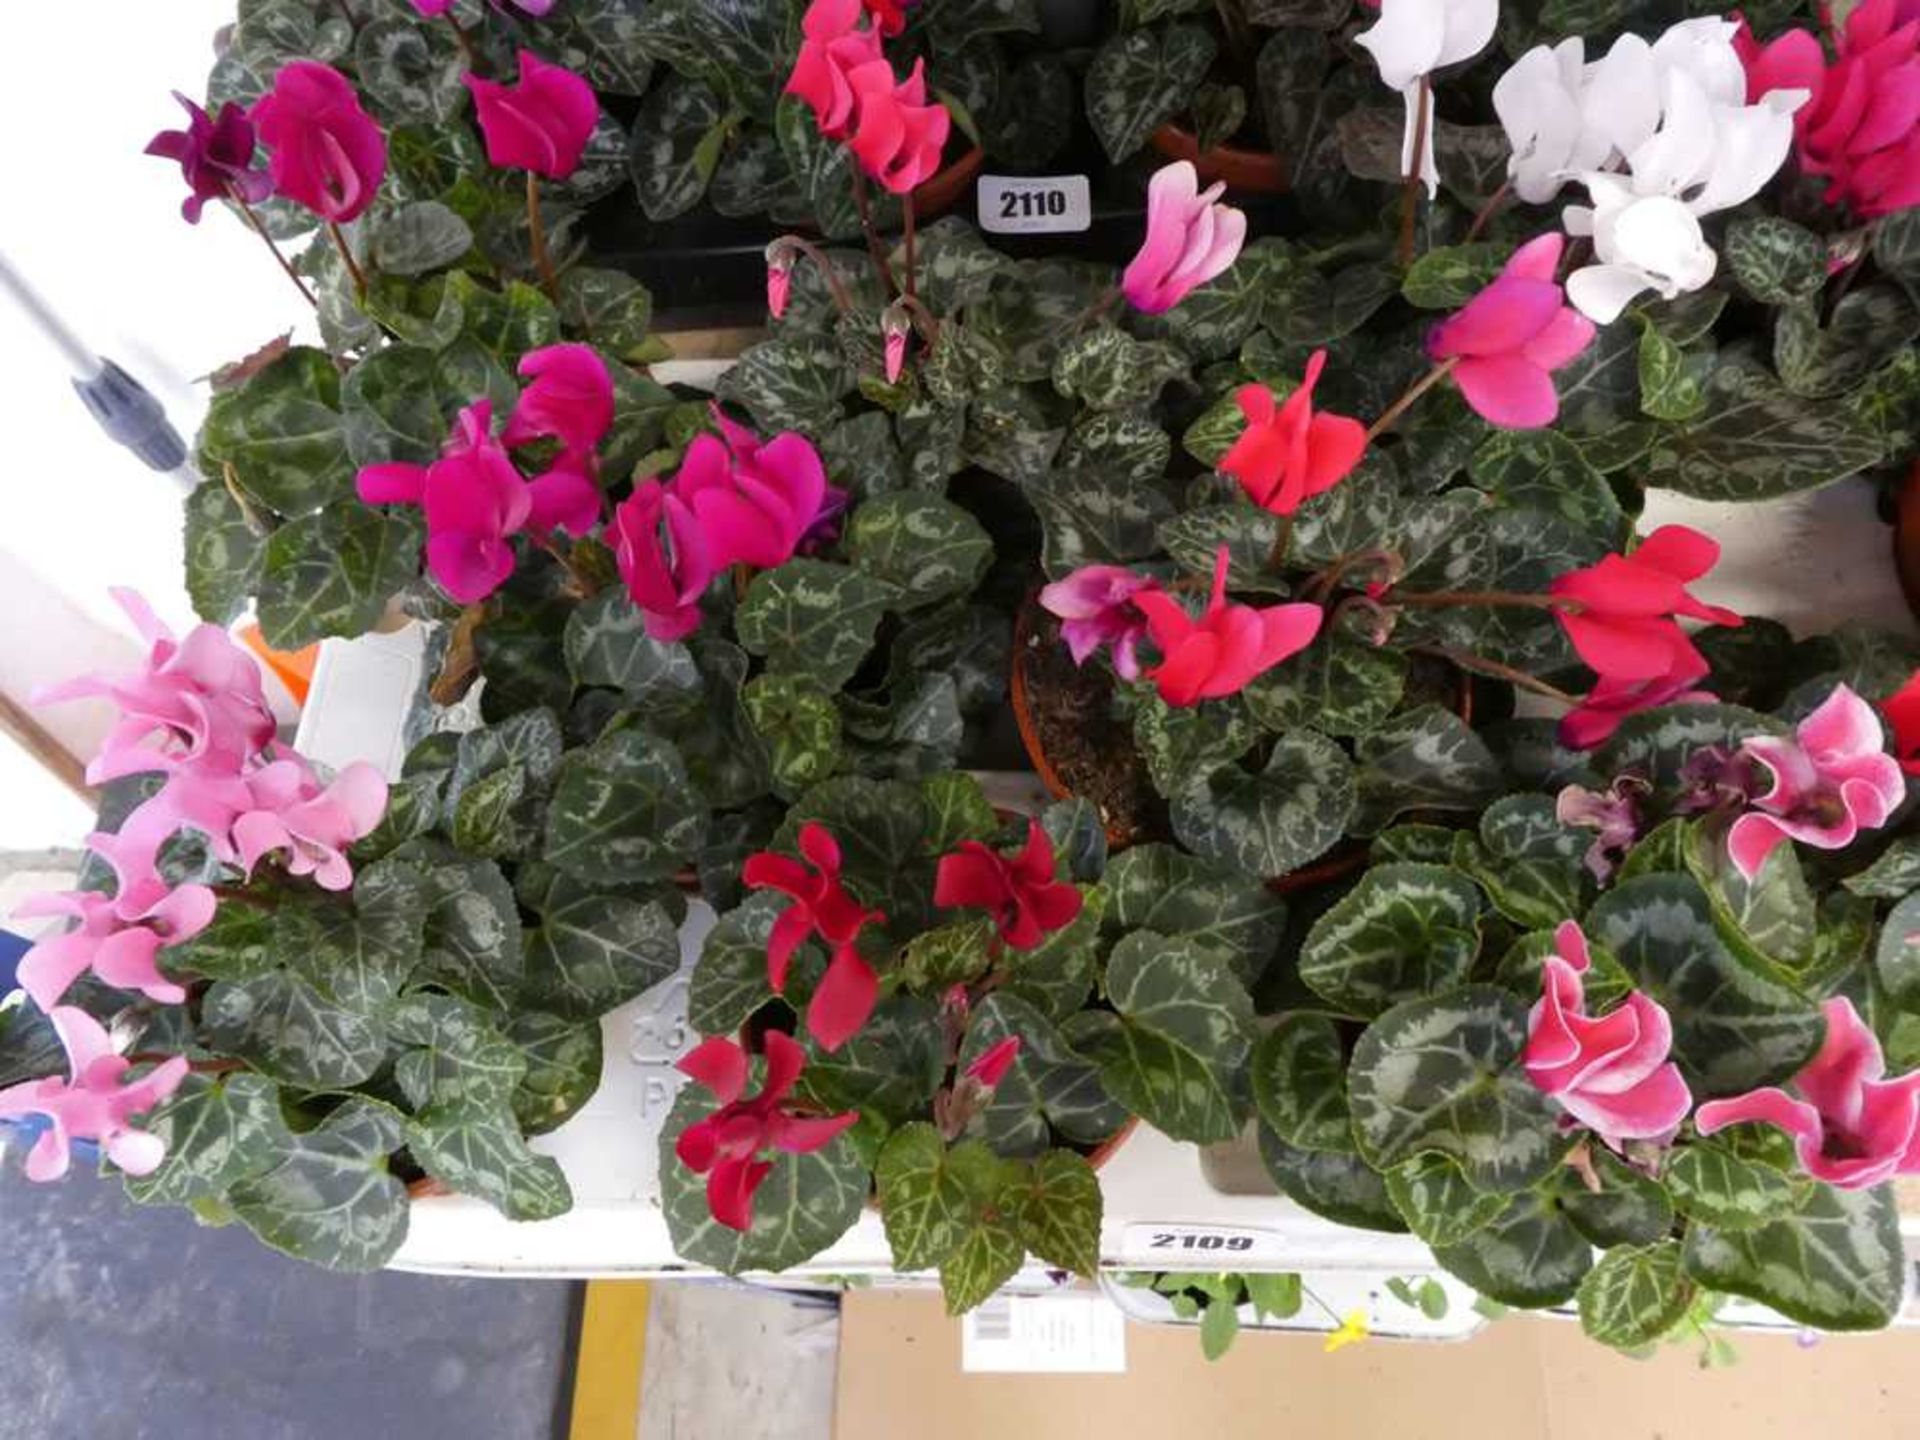 Tray containing 8 pots of cyclamen